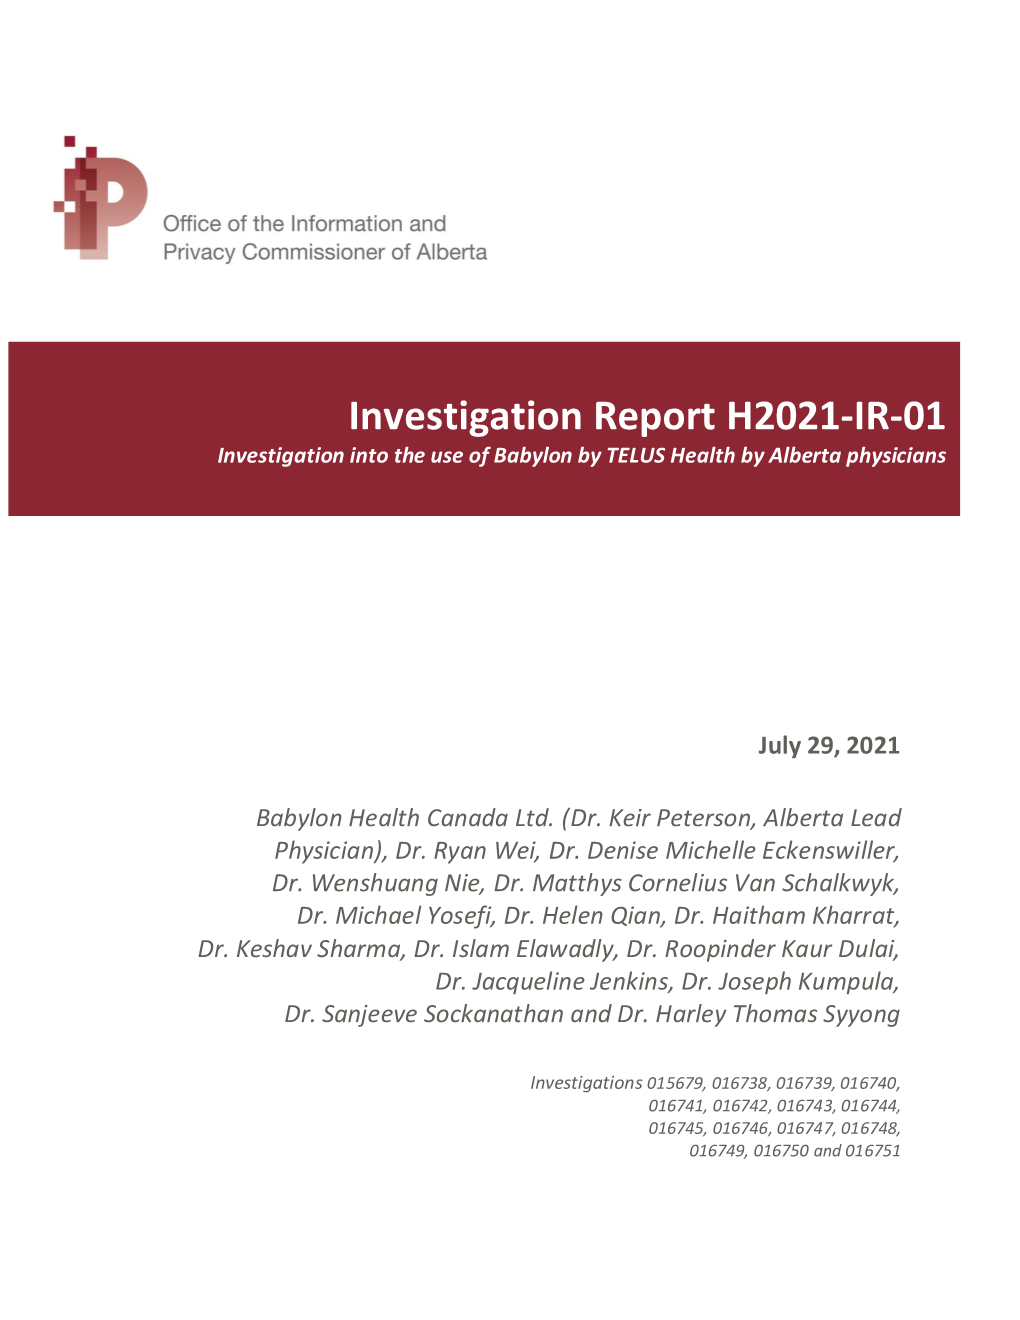 Investigation Report H2021-IR-01 Investigation Into the Use of Babylon by TELUS Health by Alberta Physicians